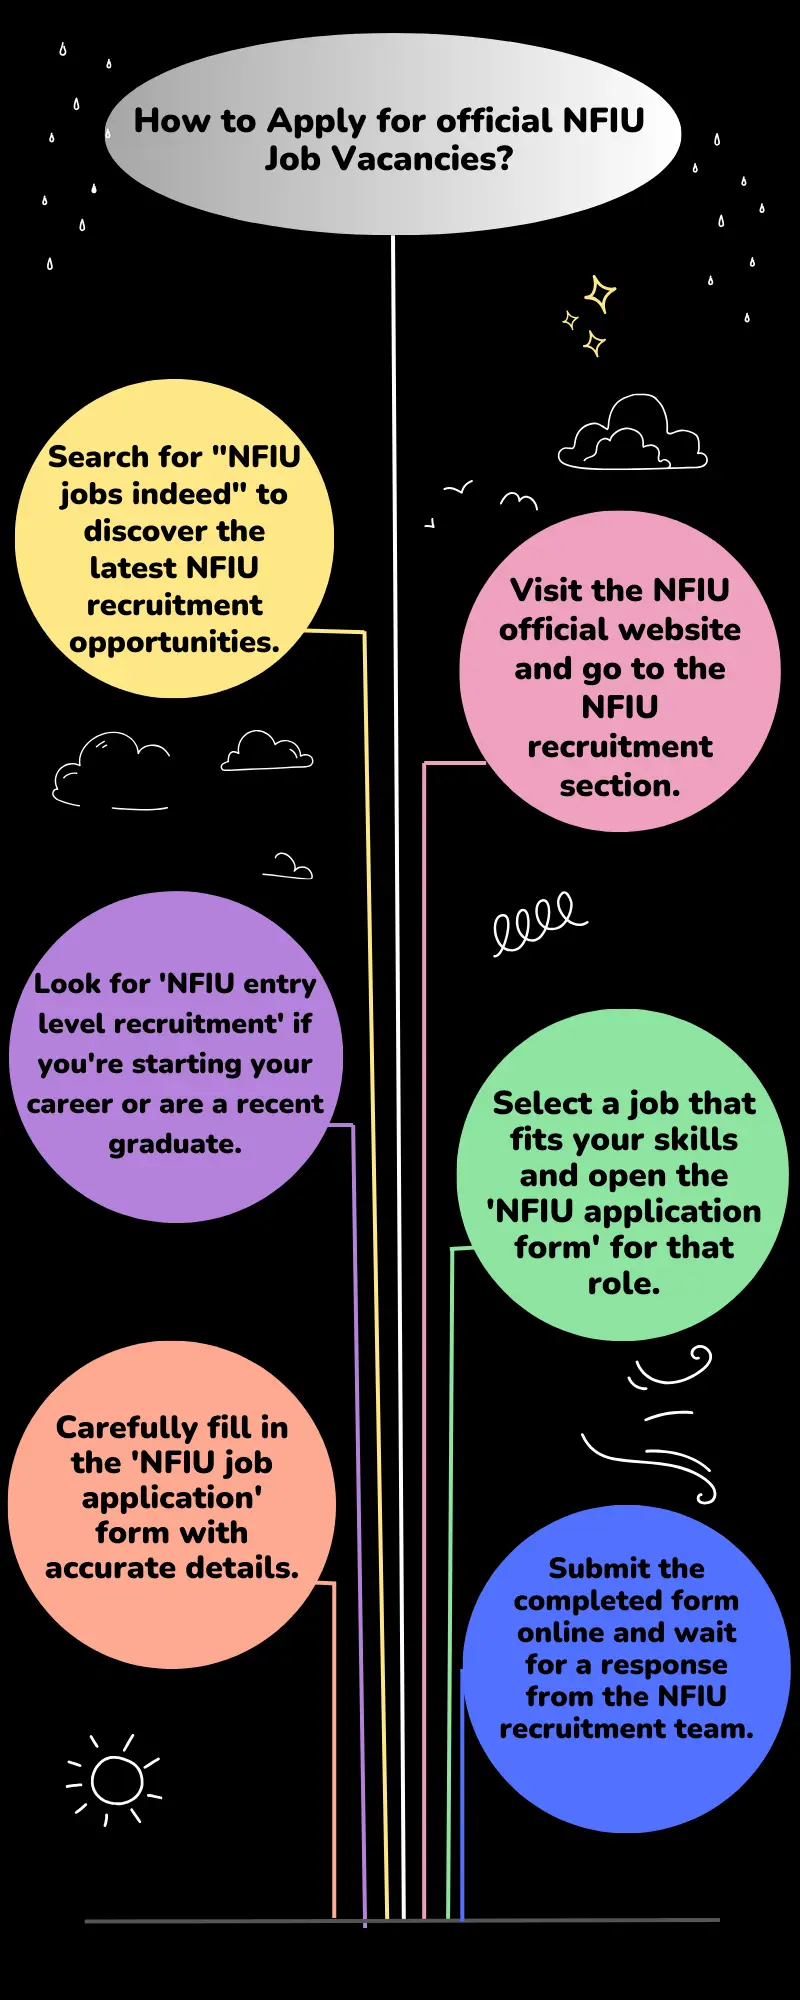 How to Apply for official NFIU Job Vacancies?